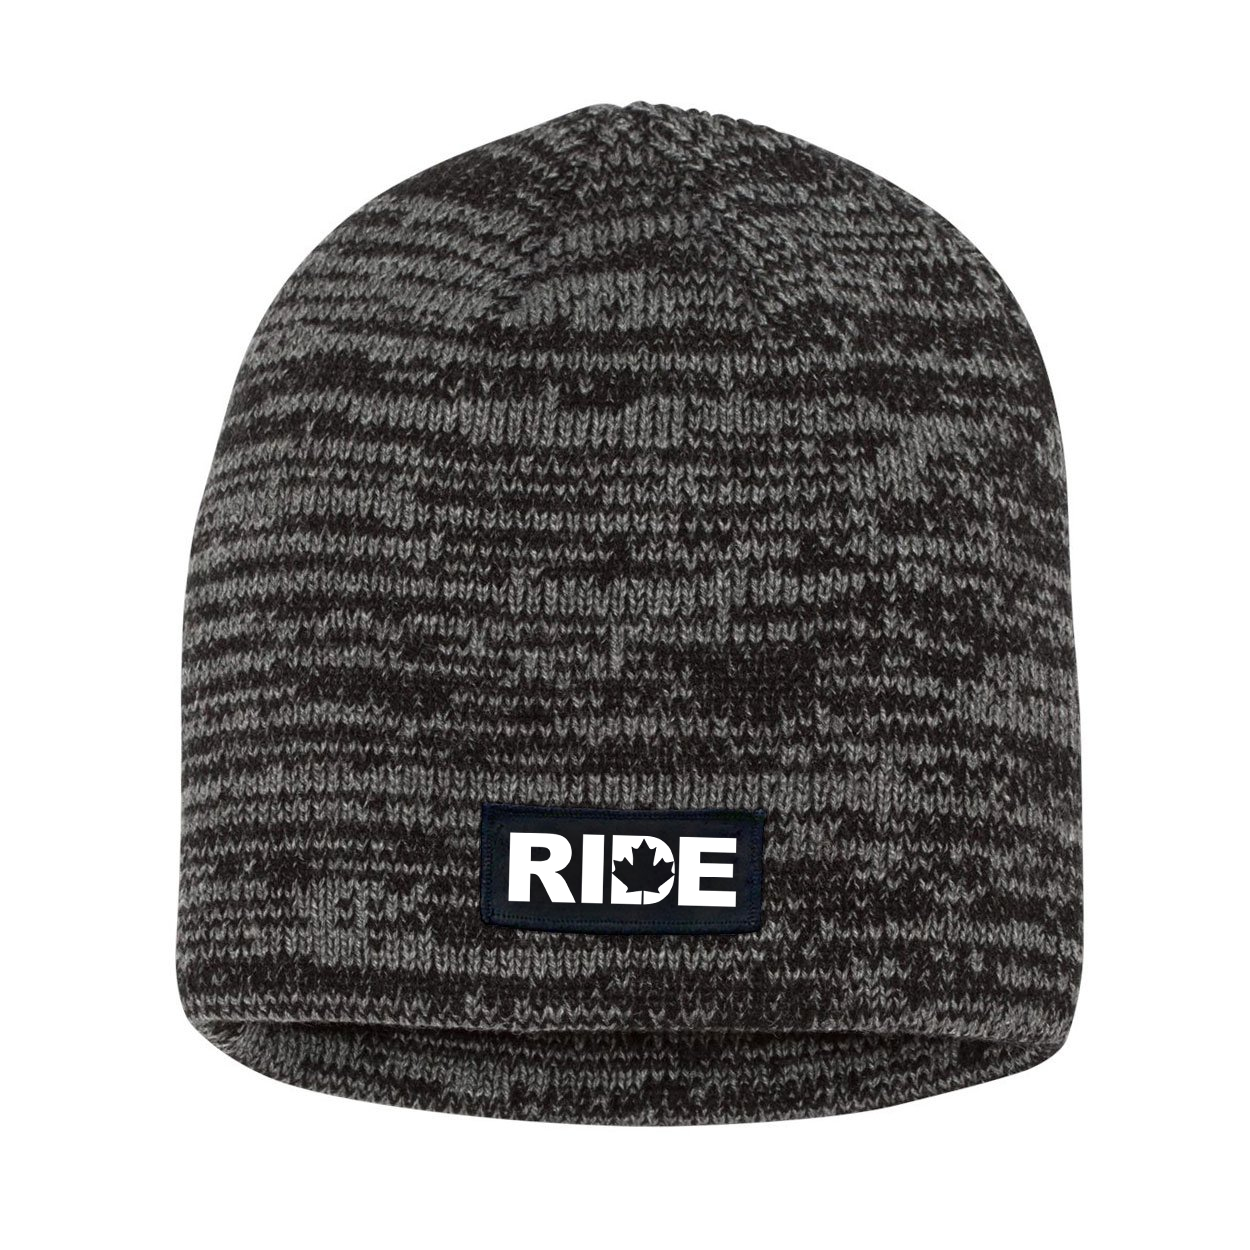 Ride Canada Night Out Woven Patch Skully Marled Knit Beanie Black/Gray (White Logo)